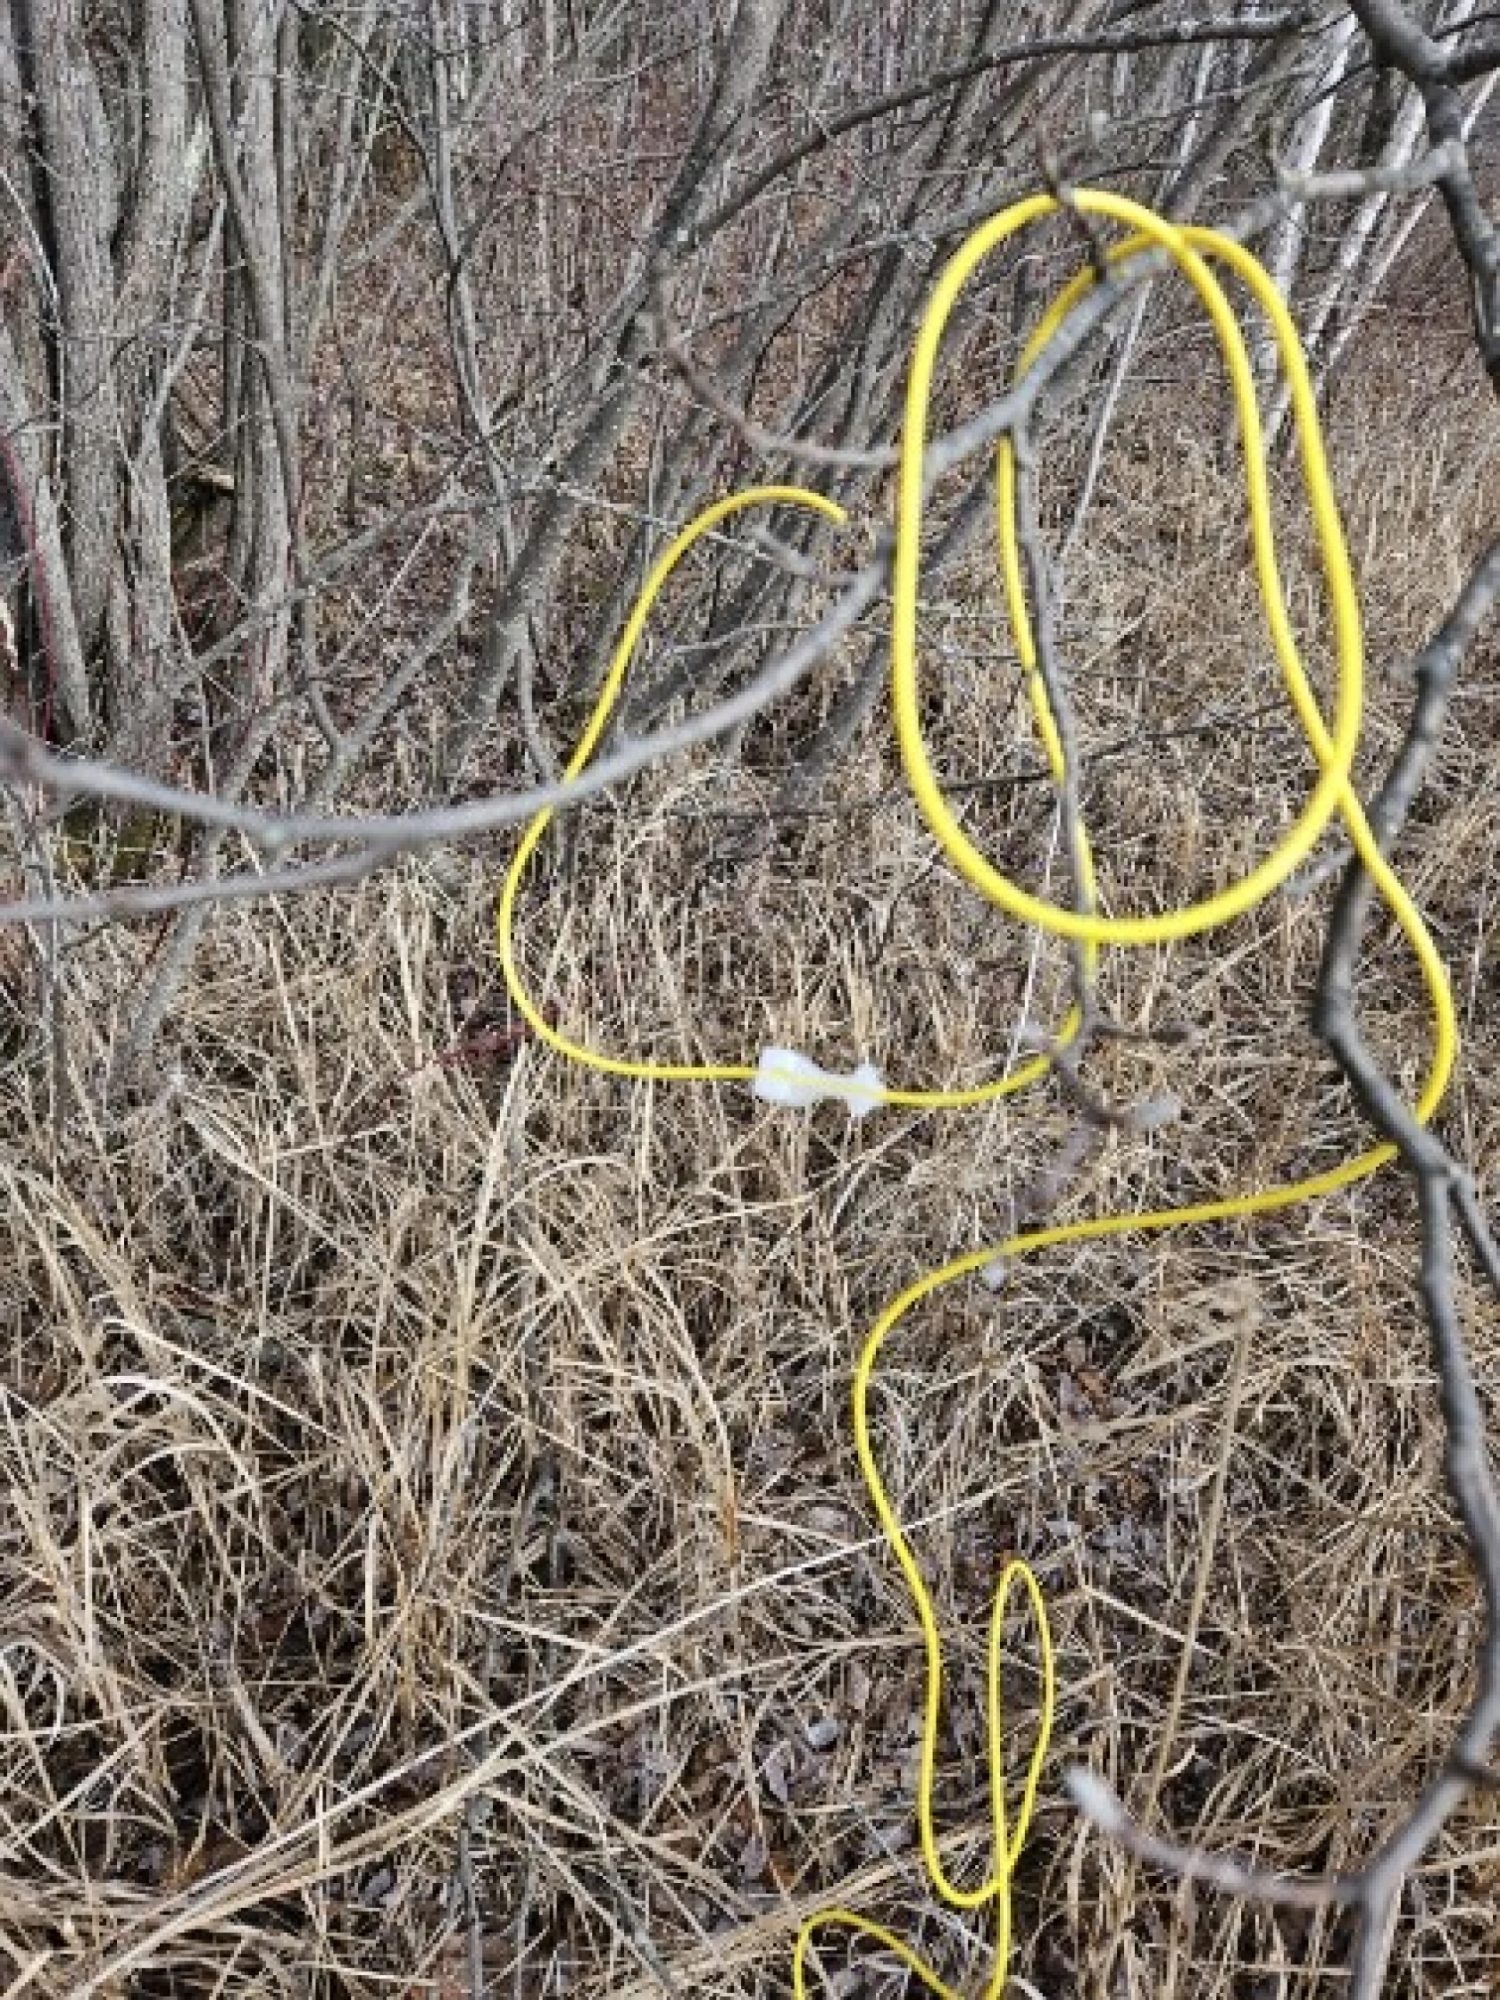 A detonator cord tangled in branches.